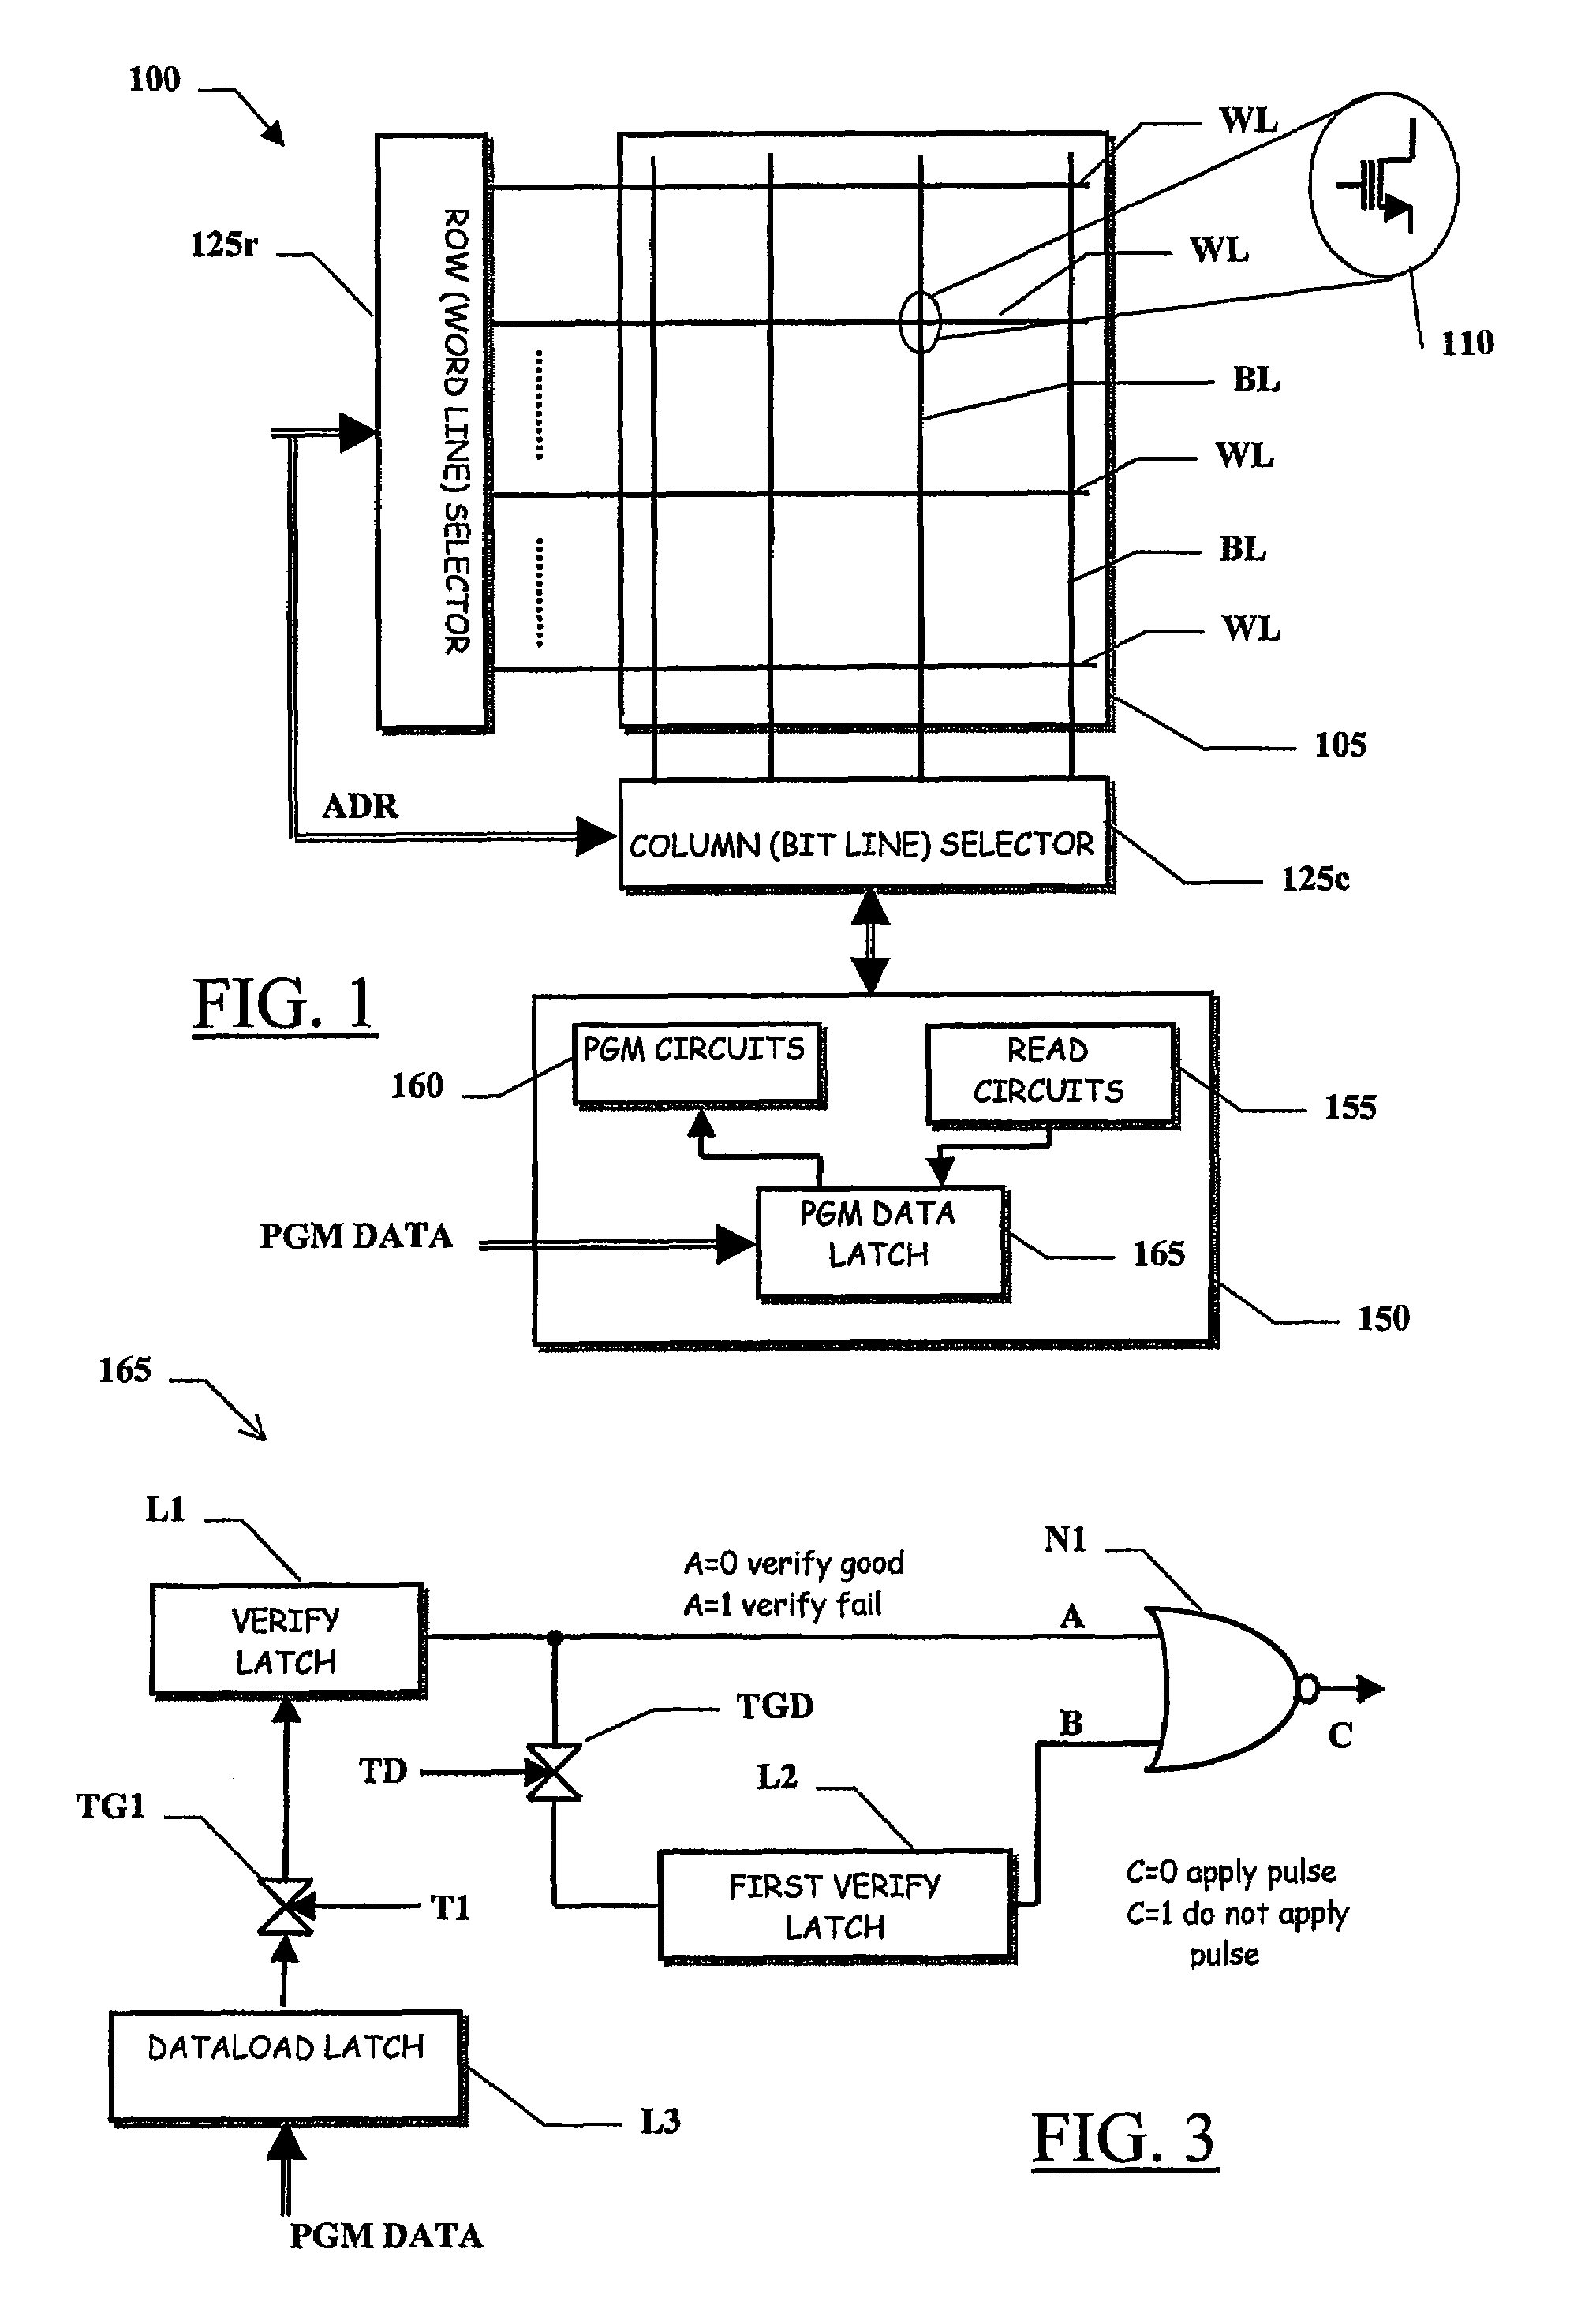 Circuit and method for electrically programming a non-volatile semiconductor memory via an additional programming pulse after verification